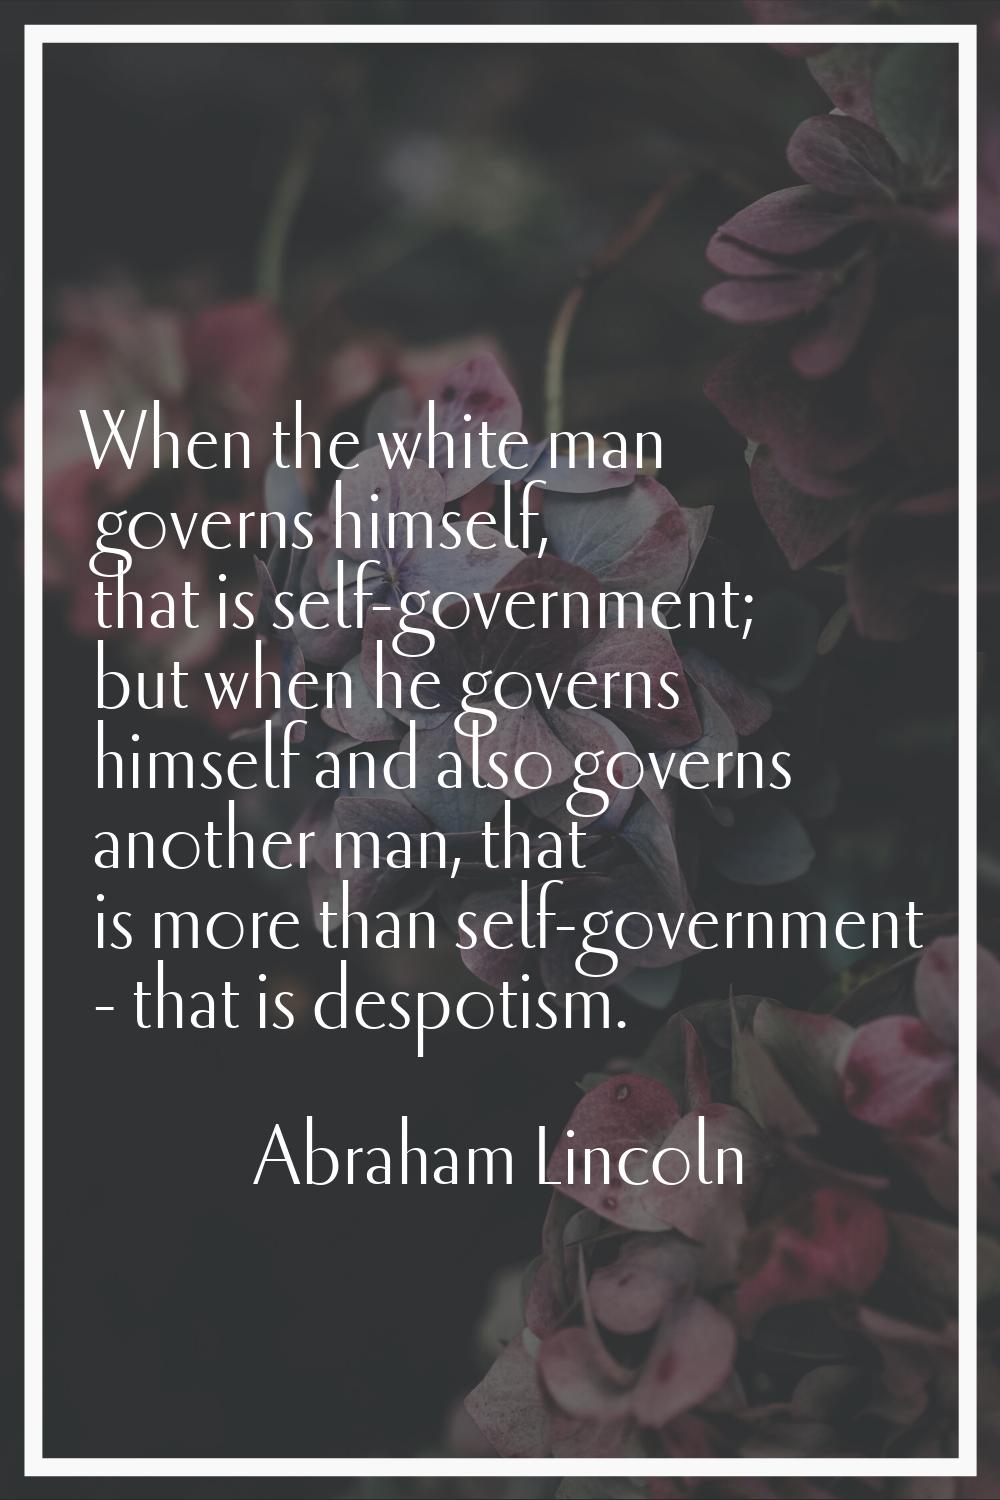 When the white man governs himself, that is self-government; but when he governs himself and also g